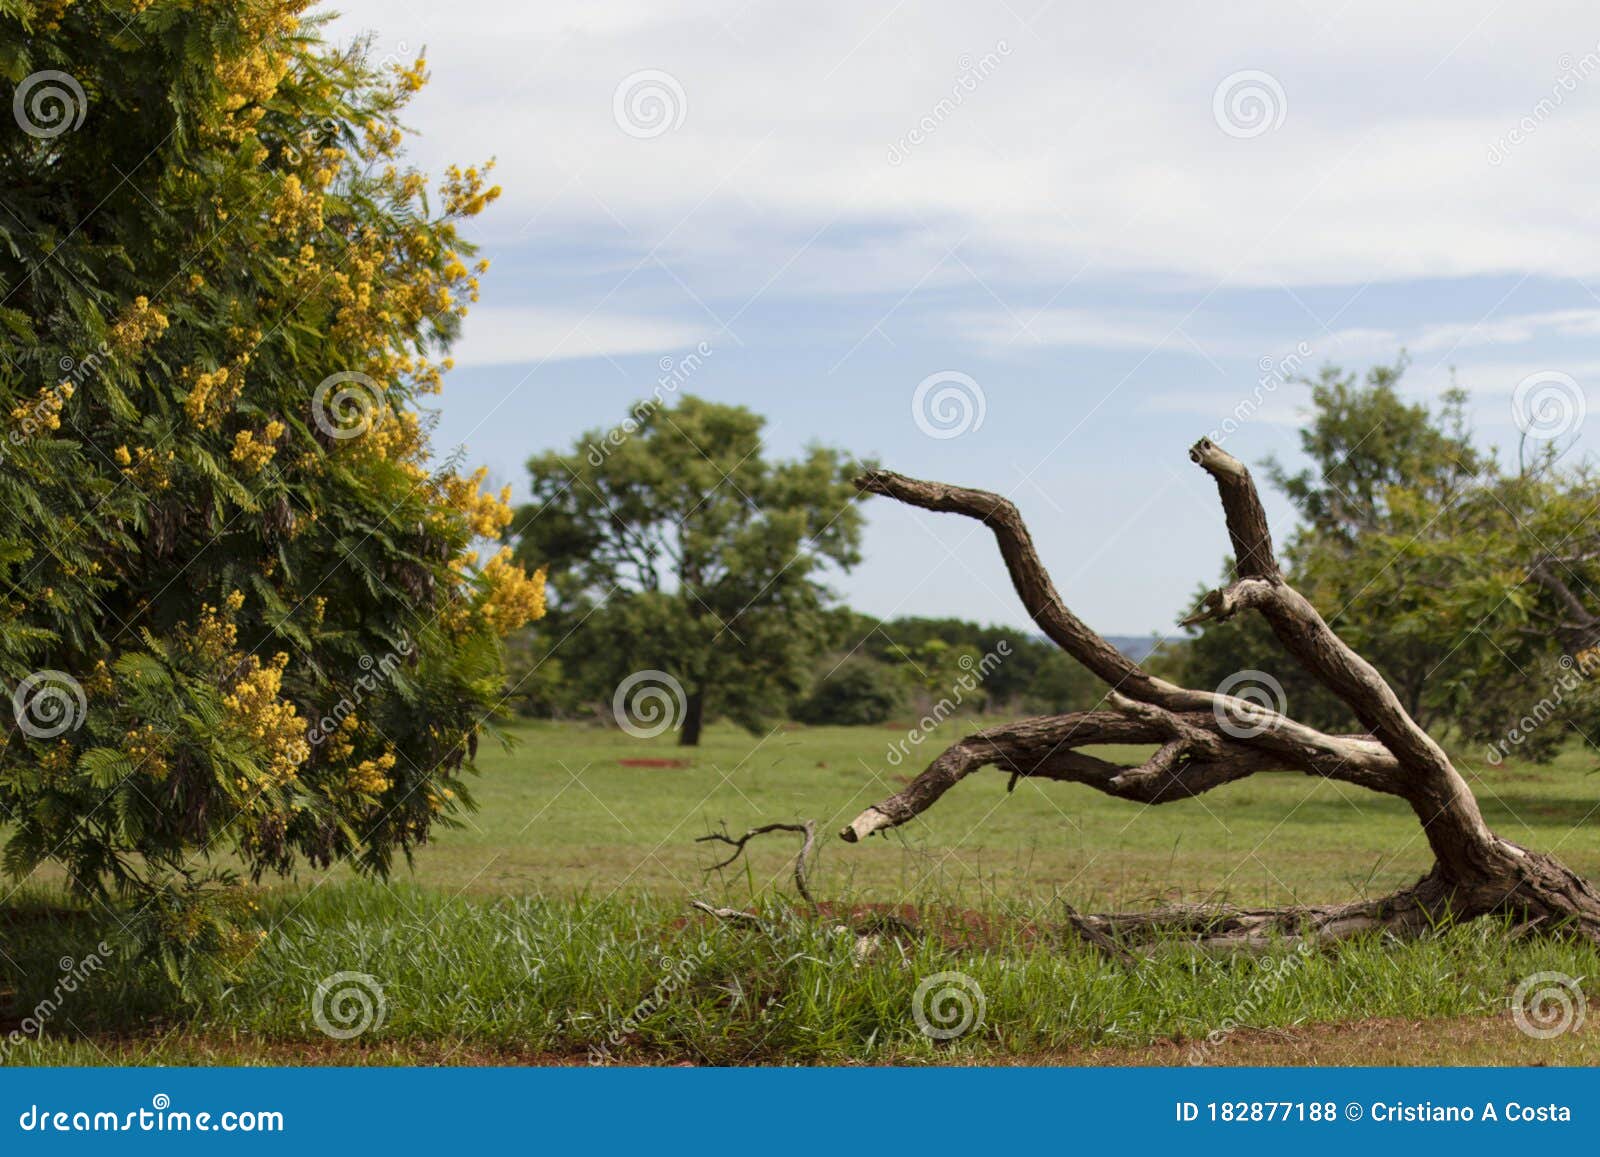 twisted tree trunk